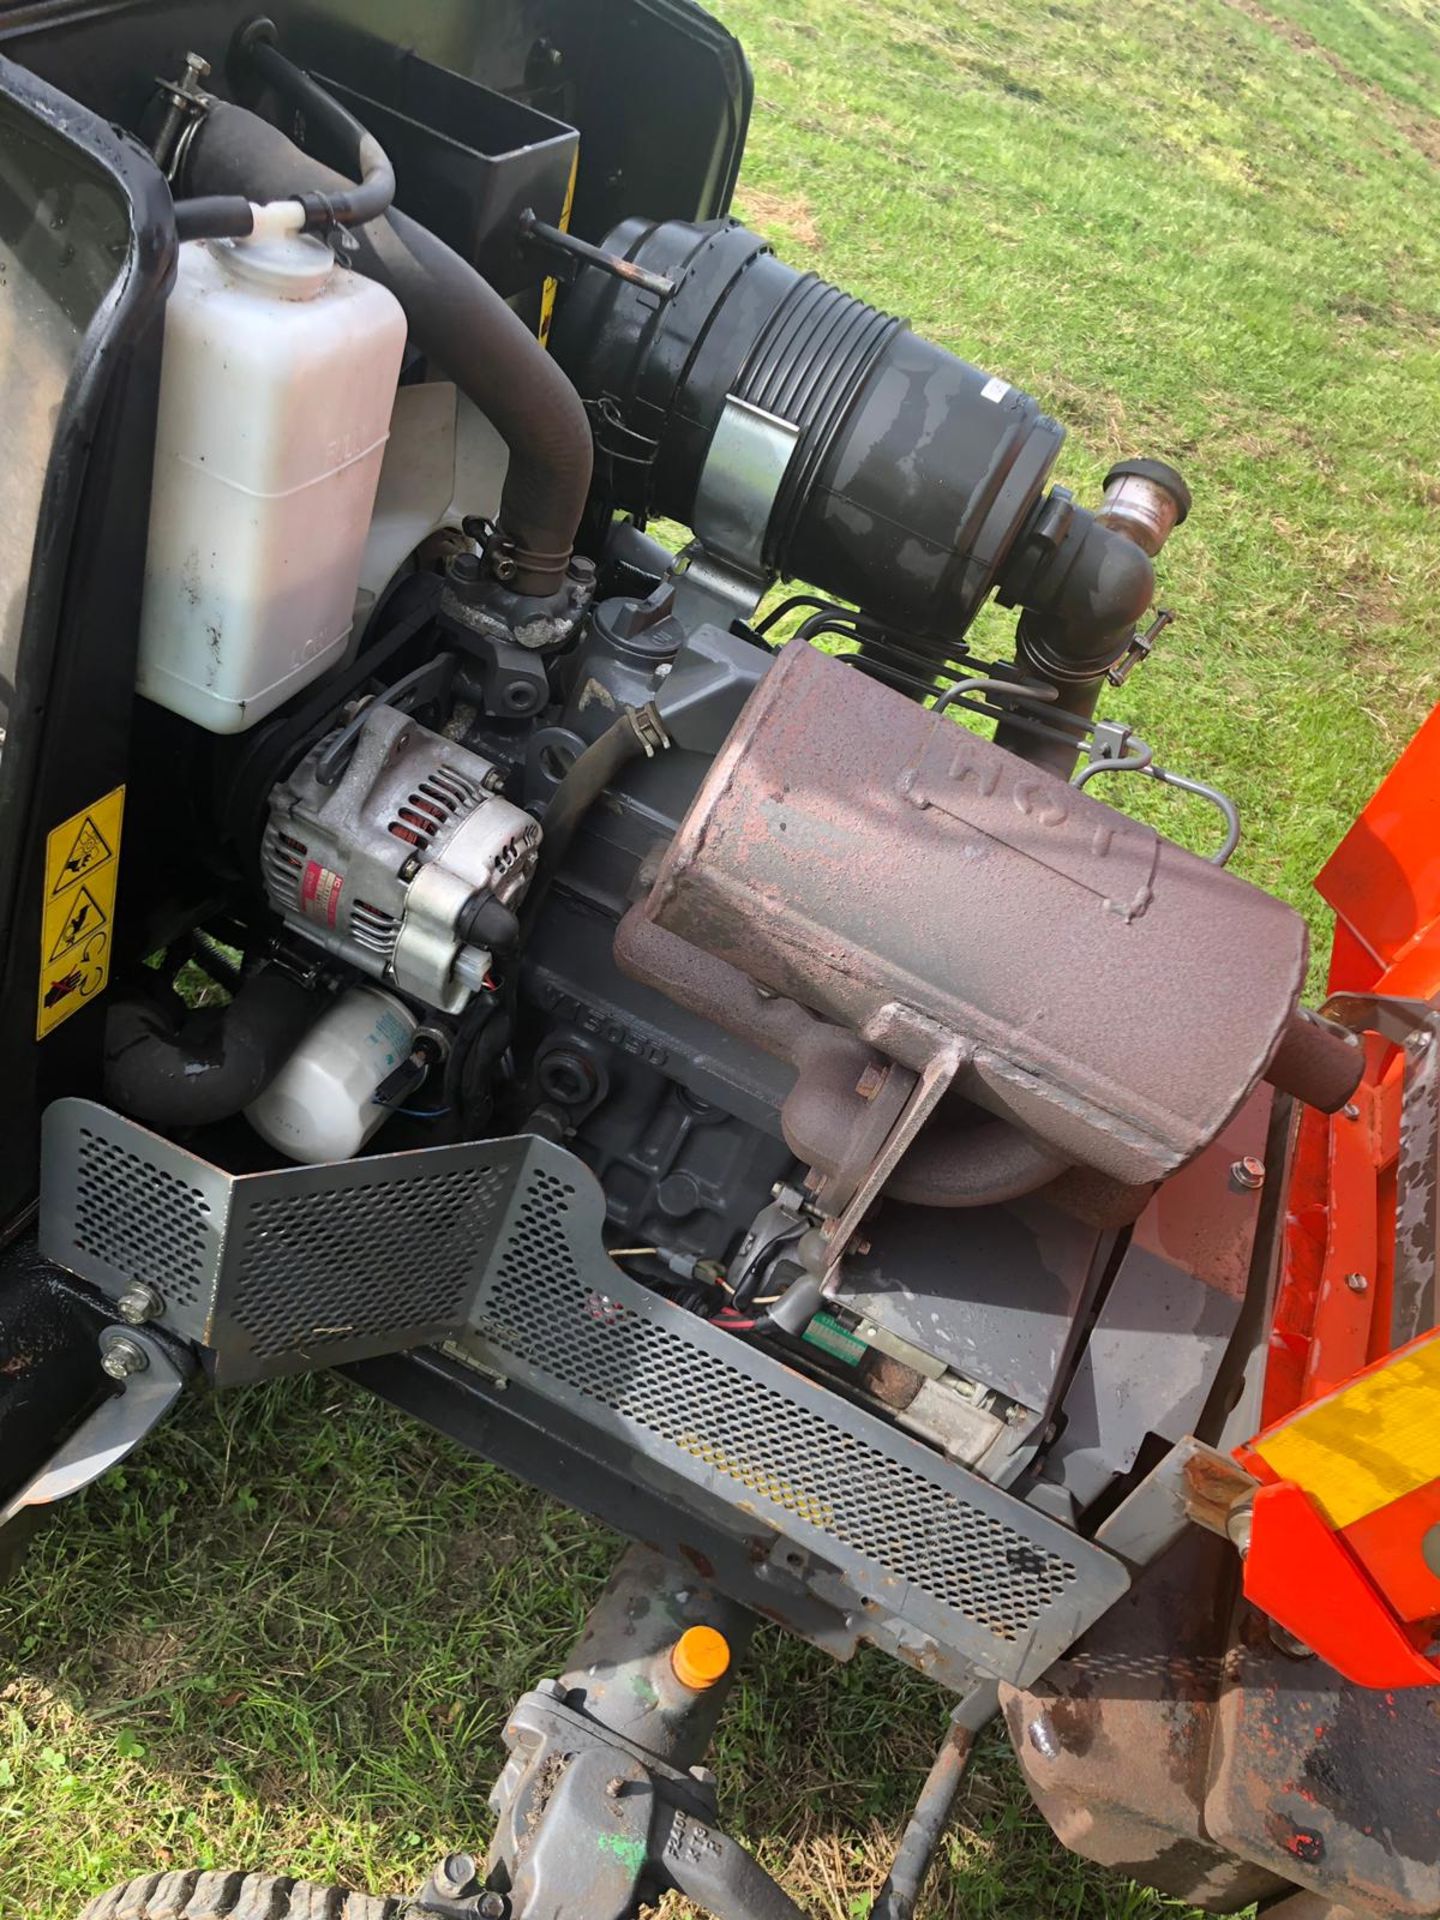 KUBTOA F3680 RIDE ON LAWN MOWER, RUNS WORKS AND CUTS, YEAR 2013 *PLUS VAT* - Image 8 of 8